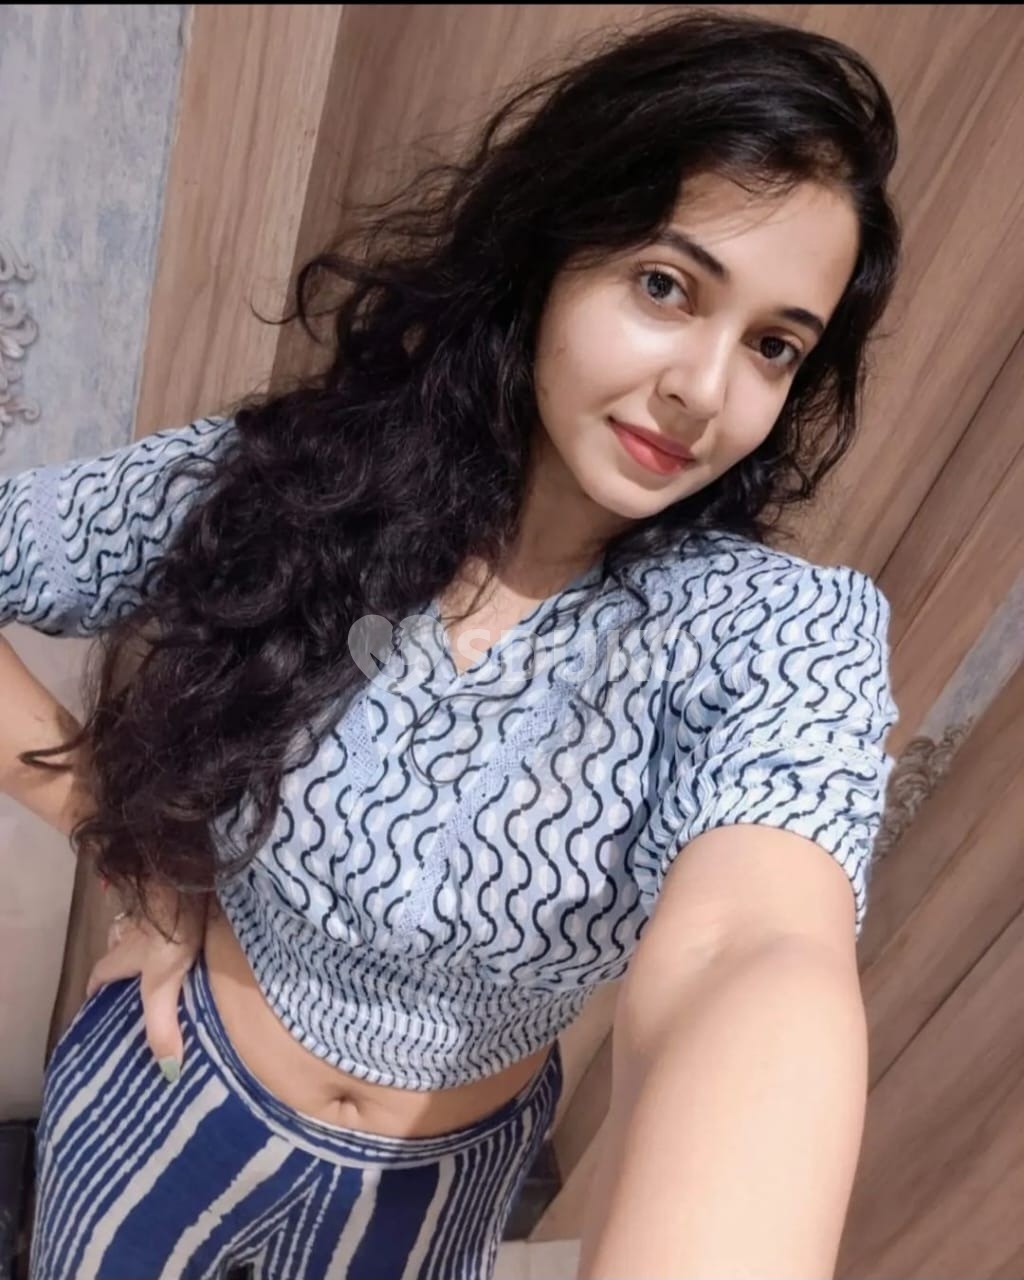 Dum Dum ✅ 100 % SAFE AND SECURE TODAY LOW PRICE UNLIMITED ENJOY HOT COLLEGE GIRL HOUSEWIFE AUNTIES AVAILABL. . .  .